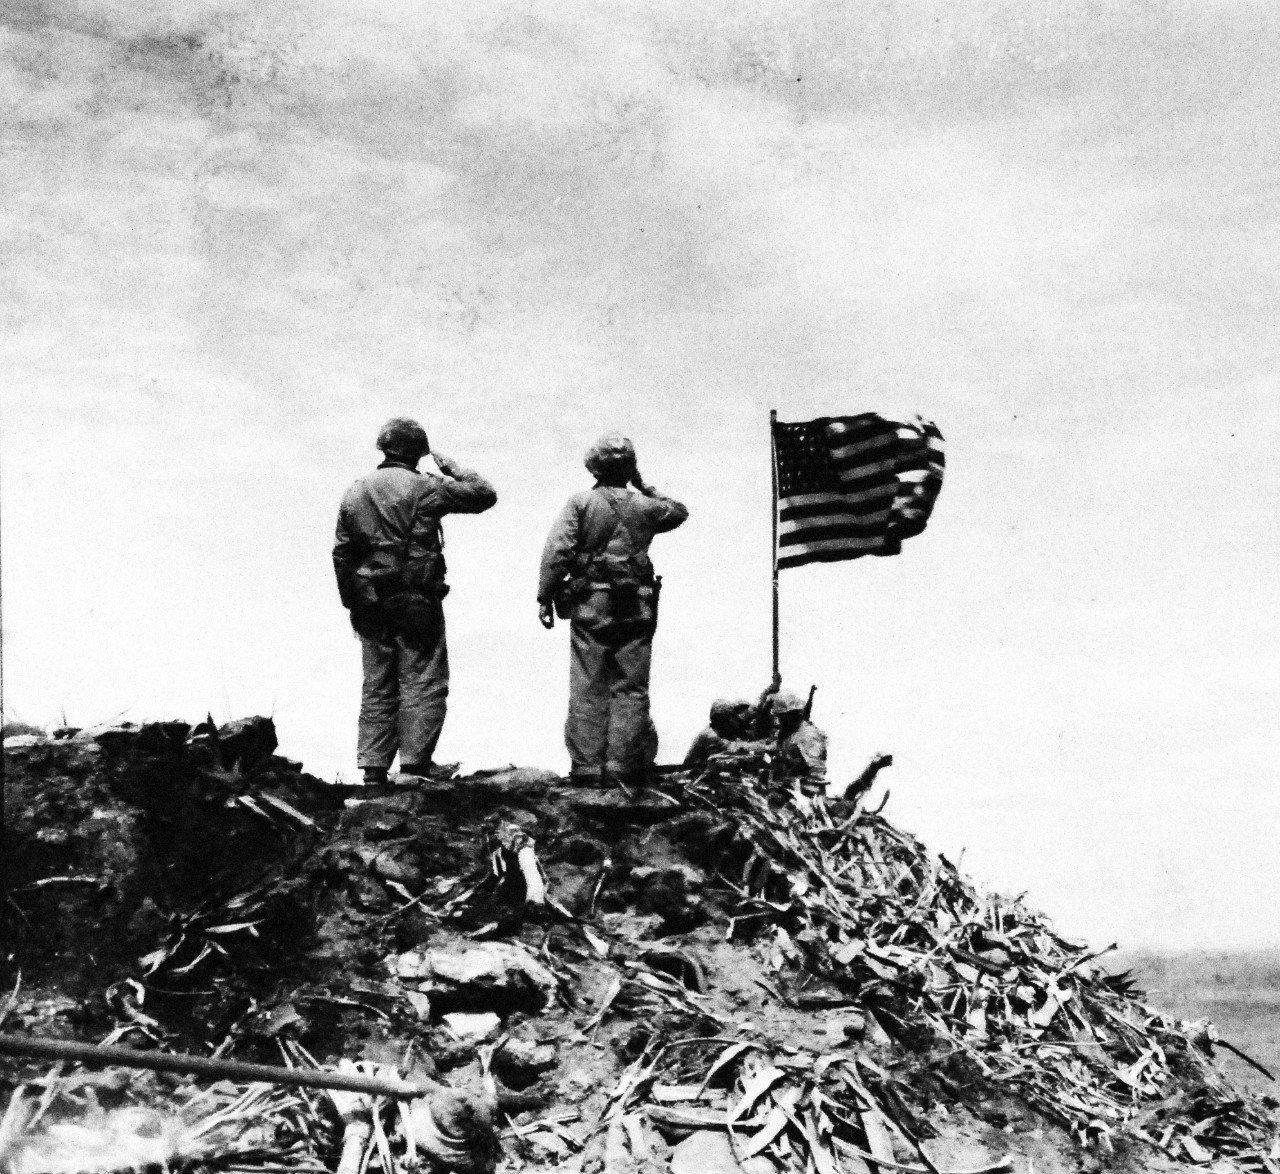 127-GW-319-112719: Iwo Jima Operations,  February 1945.  Two Marine render a salute to the flag as it is raised on Mount Surbachi by Marines of the Fifth Marine Division.   Photographed by Bob Campbell, February 23, 1945.   Official U.S. Marine Corps Photograph, now in the collections of the National Archives.  (2016/09/06).